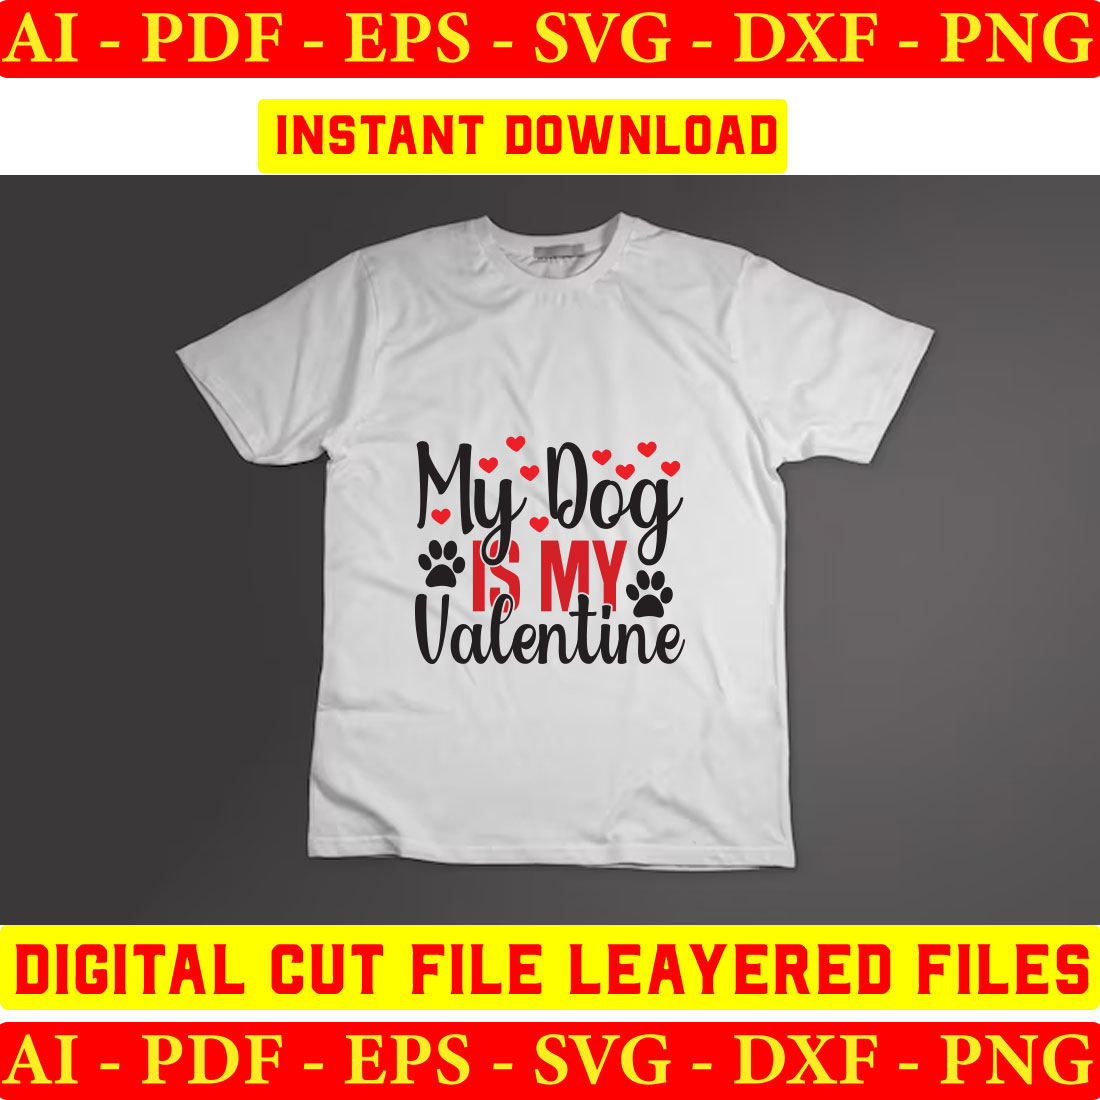 T - shirt that says my dog is my valentine.